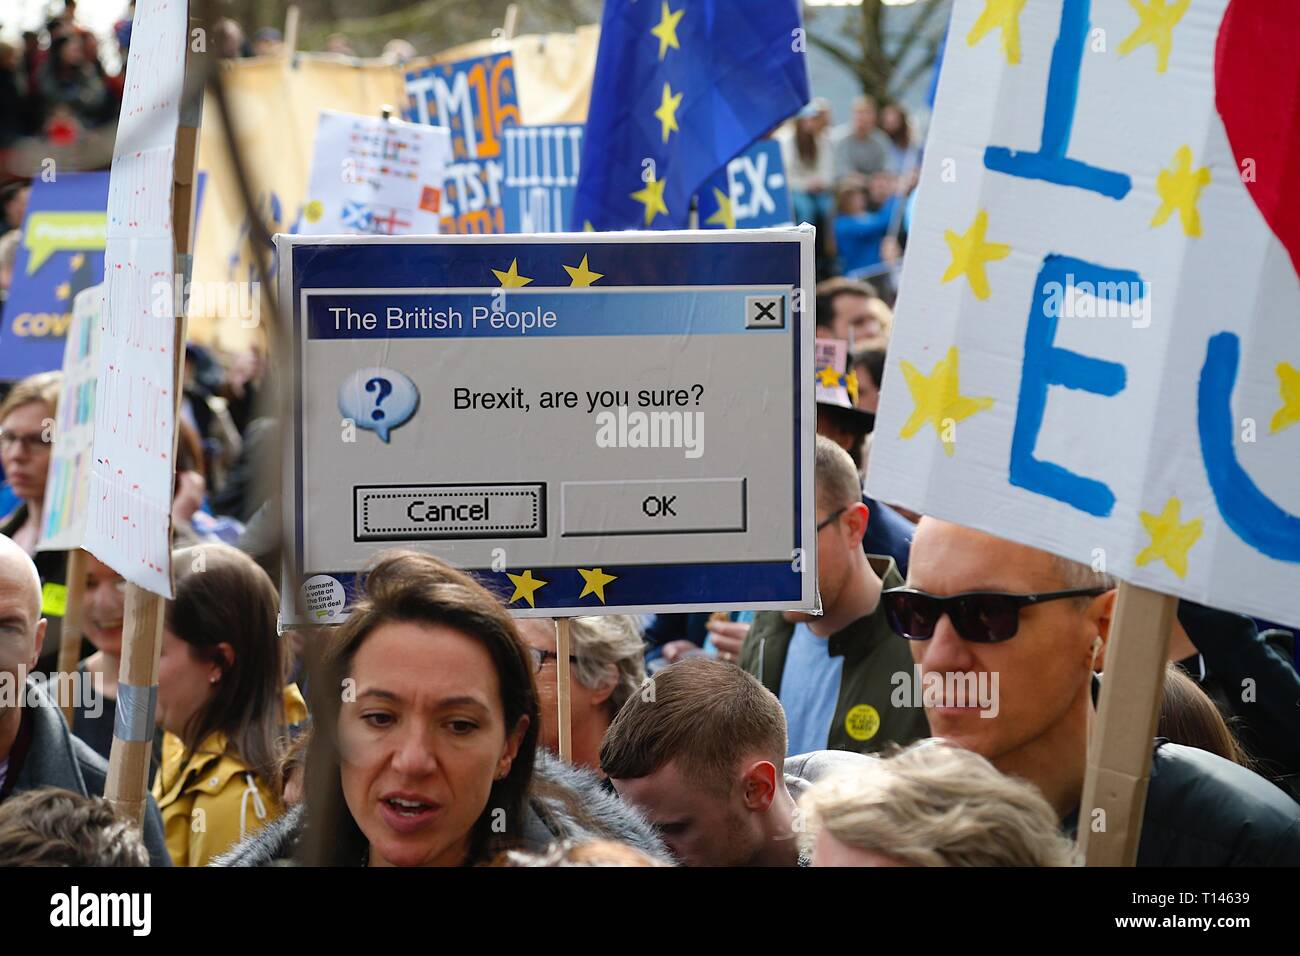 London, UK. 23 Mar, 2019. People’s Vote March: Hundreds of thousands of pro-EU supporters attend a mass march to Westminster. People are expected to join the march from Park Lane to Parliament Square beginning at noon with speeches commencing at 2.45pm from all political party’s. ©Paul Lawrenson 2019, Photo Credit: Paul Lawrenson/Alamy Live News Stock Photo